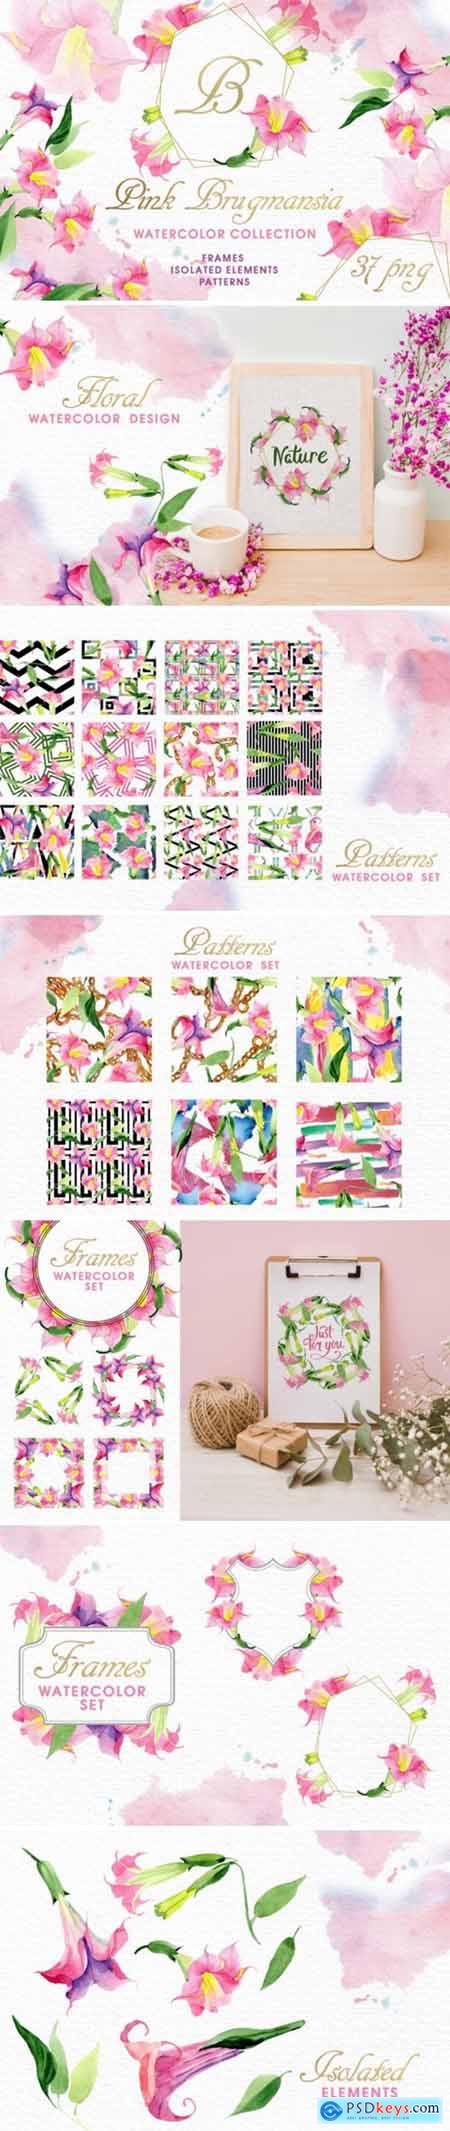 Flowers, Trees and Leaves » page 8 » Free Download Photoshop Vector ...